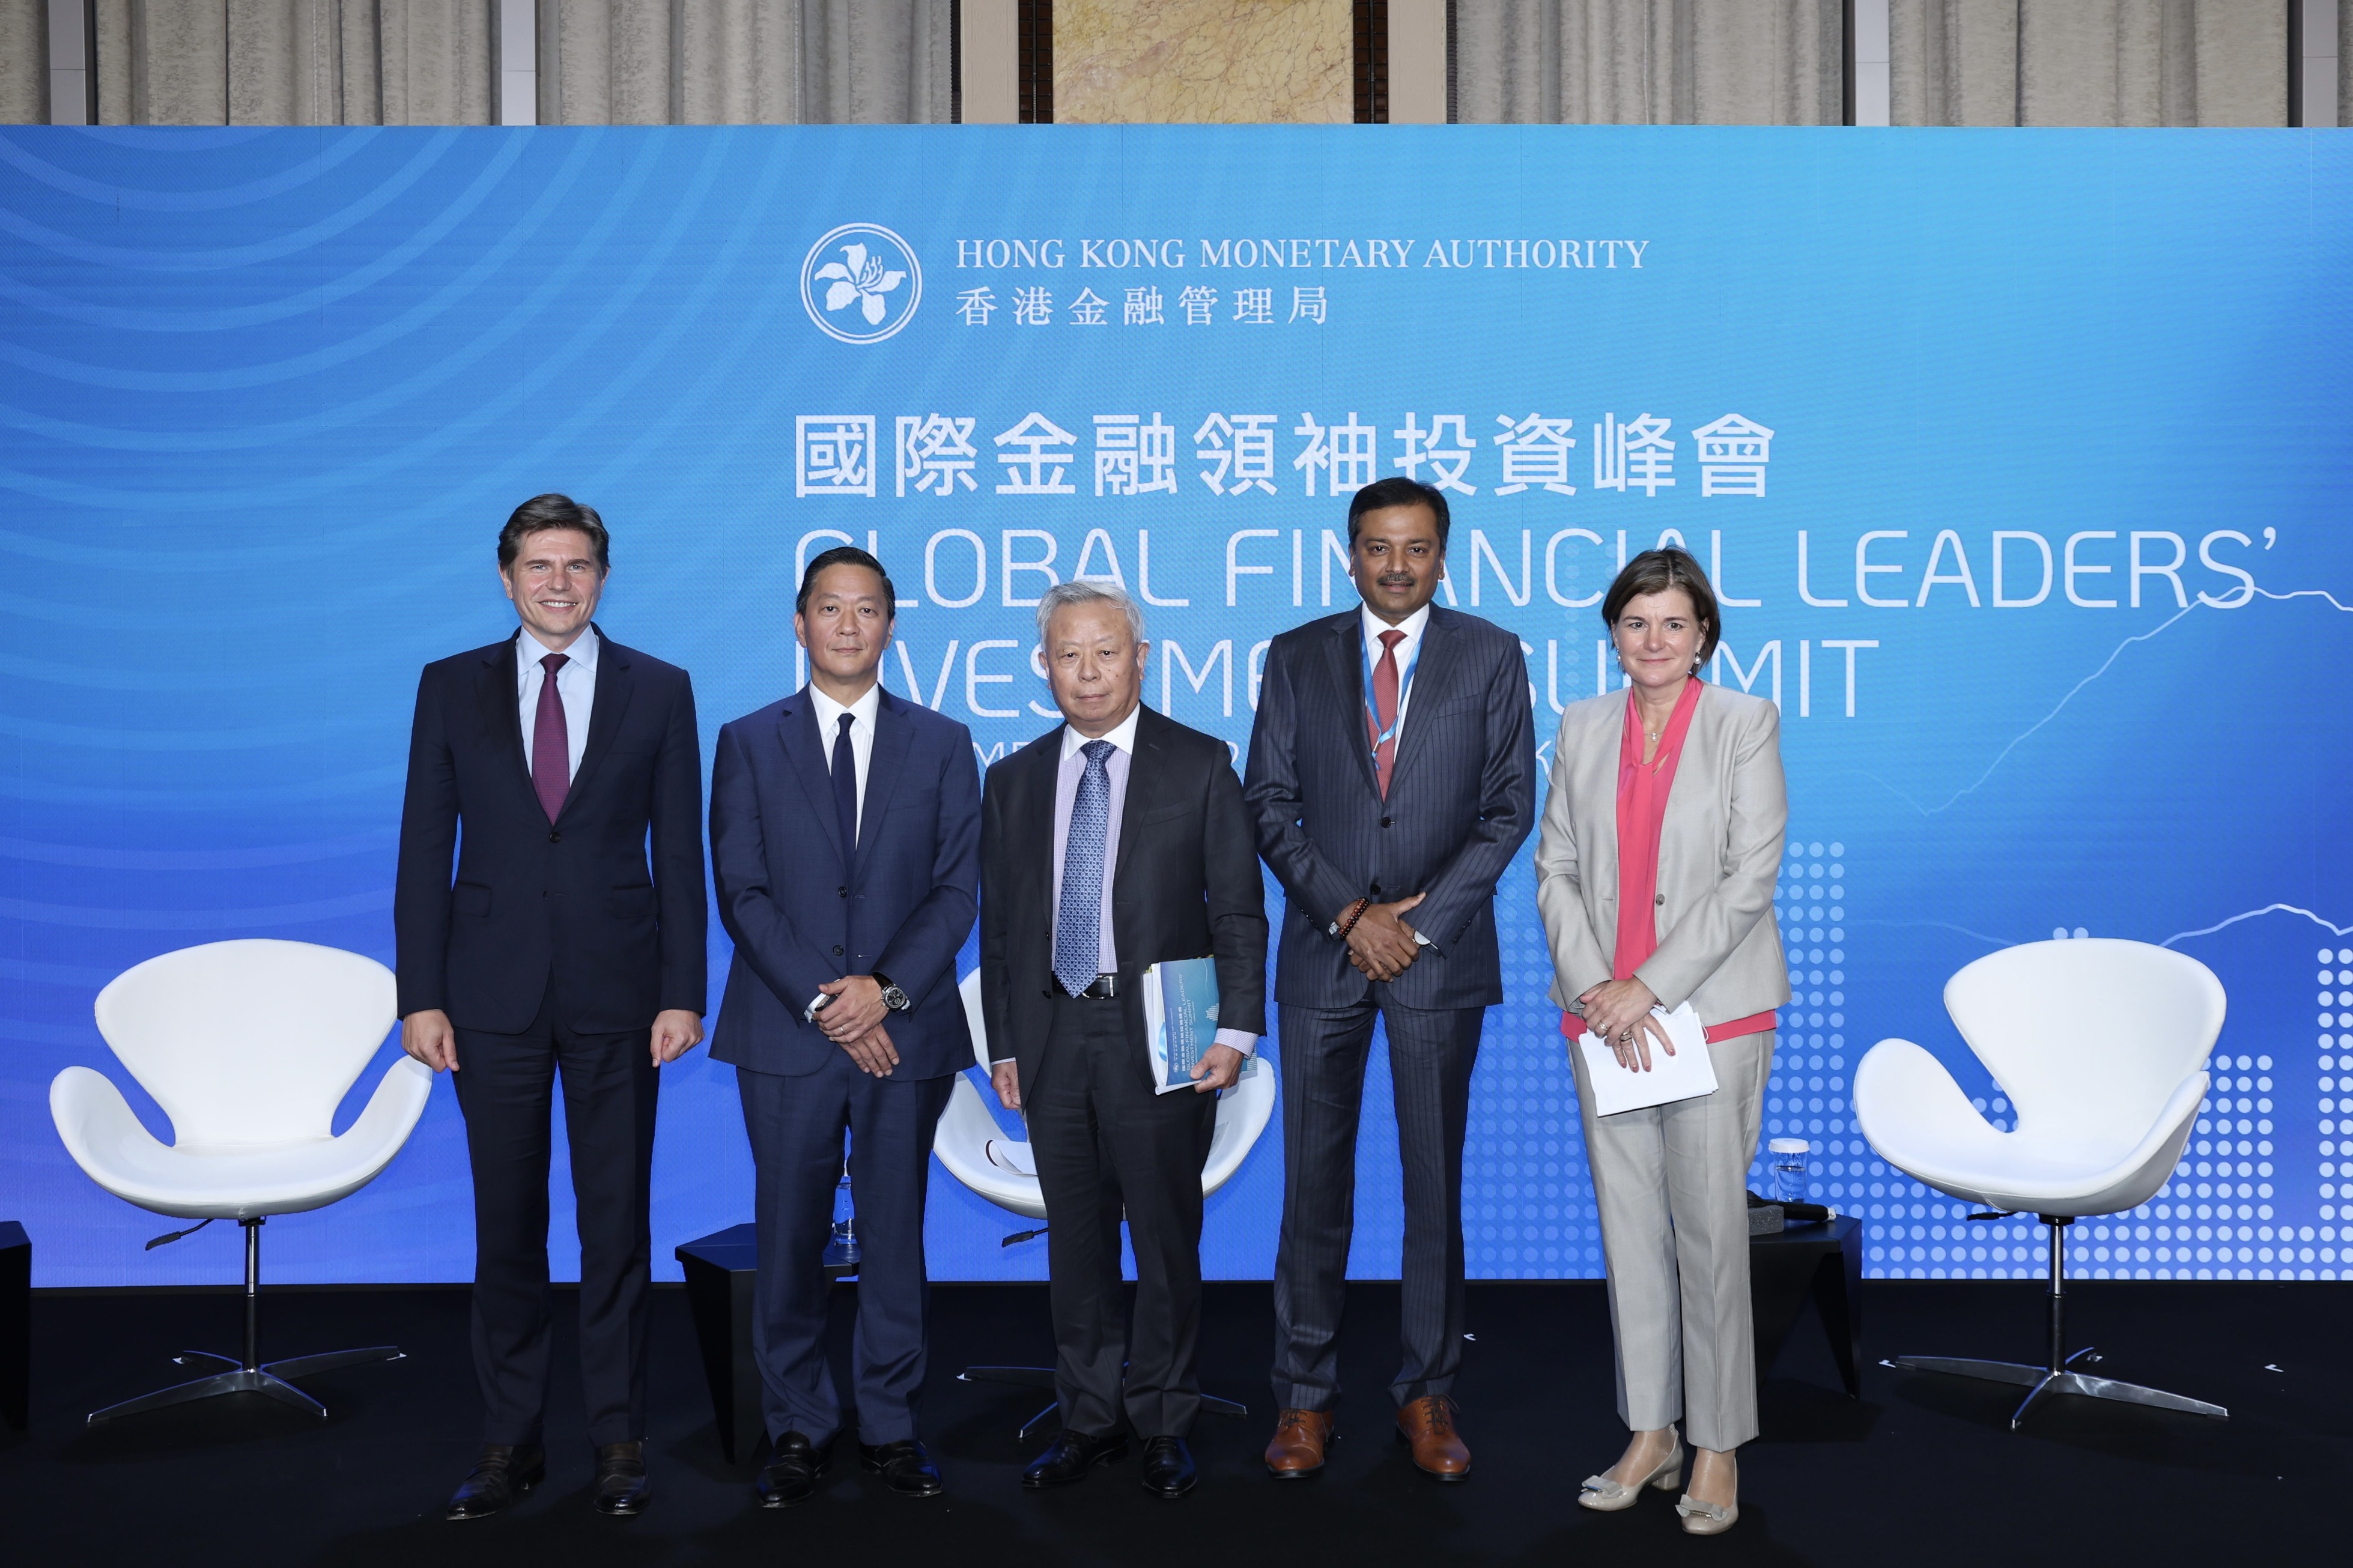 (From left to right) Nicolas Aguzin, Chief Executive Officer of HKEX; Joseph Bae, Co-Chief Executive Officer of KKR; Jin Liqun, President and Chair of the Board of Directors of Asian Infrastructure Investment Bank; Anand Selvakesari, Chief Executive Officer of Personal Banking & Wealth Management of Citigroup; Hanneke Smits, Chief Executive Officer of BNY Mellon Investment Management